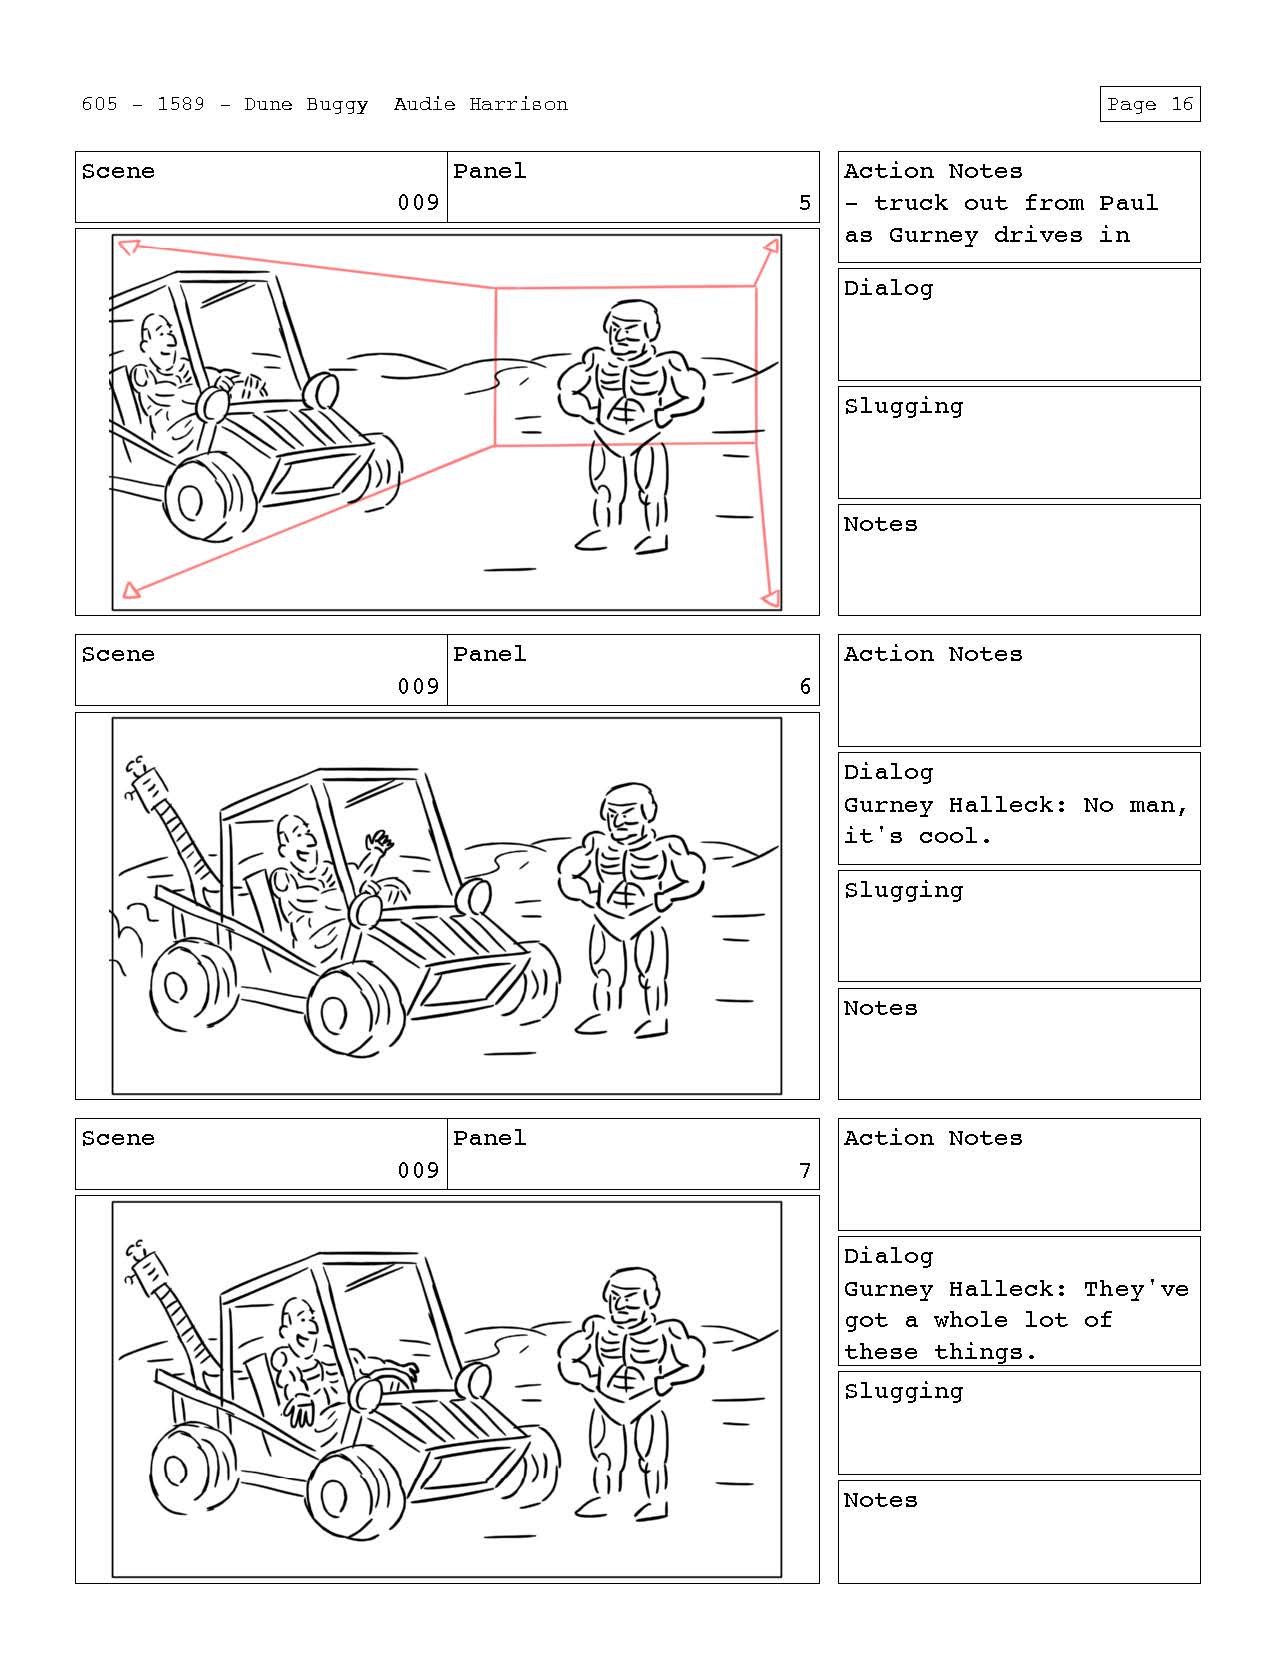 Dune_Buggy_Page_17.jpg